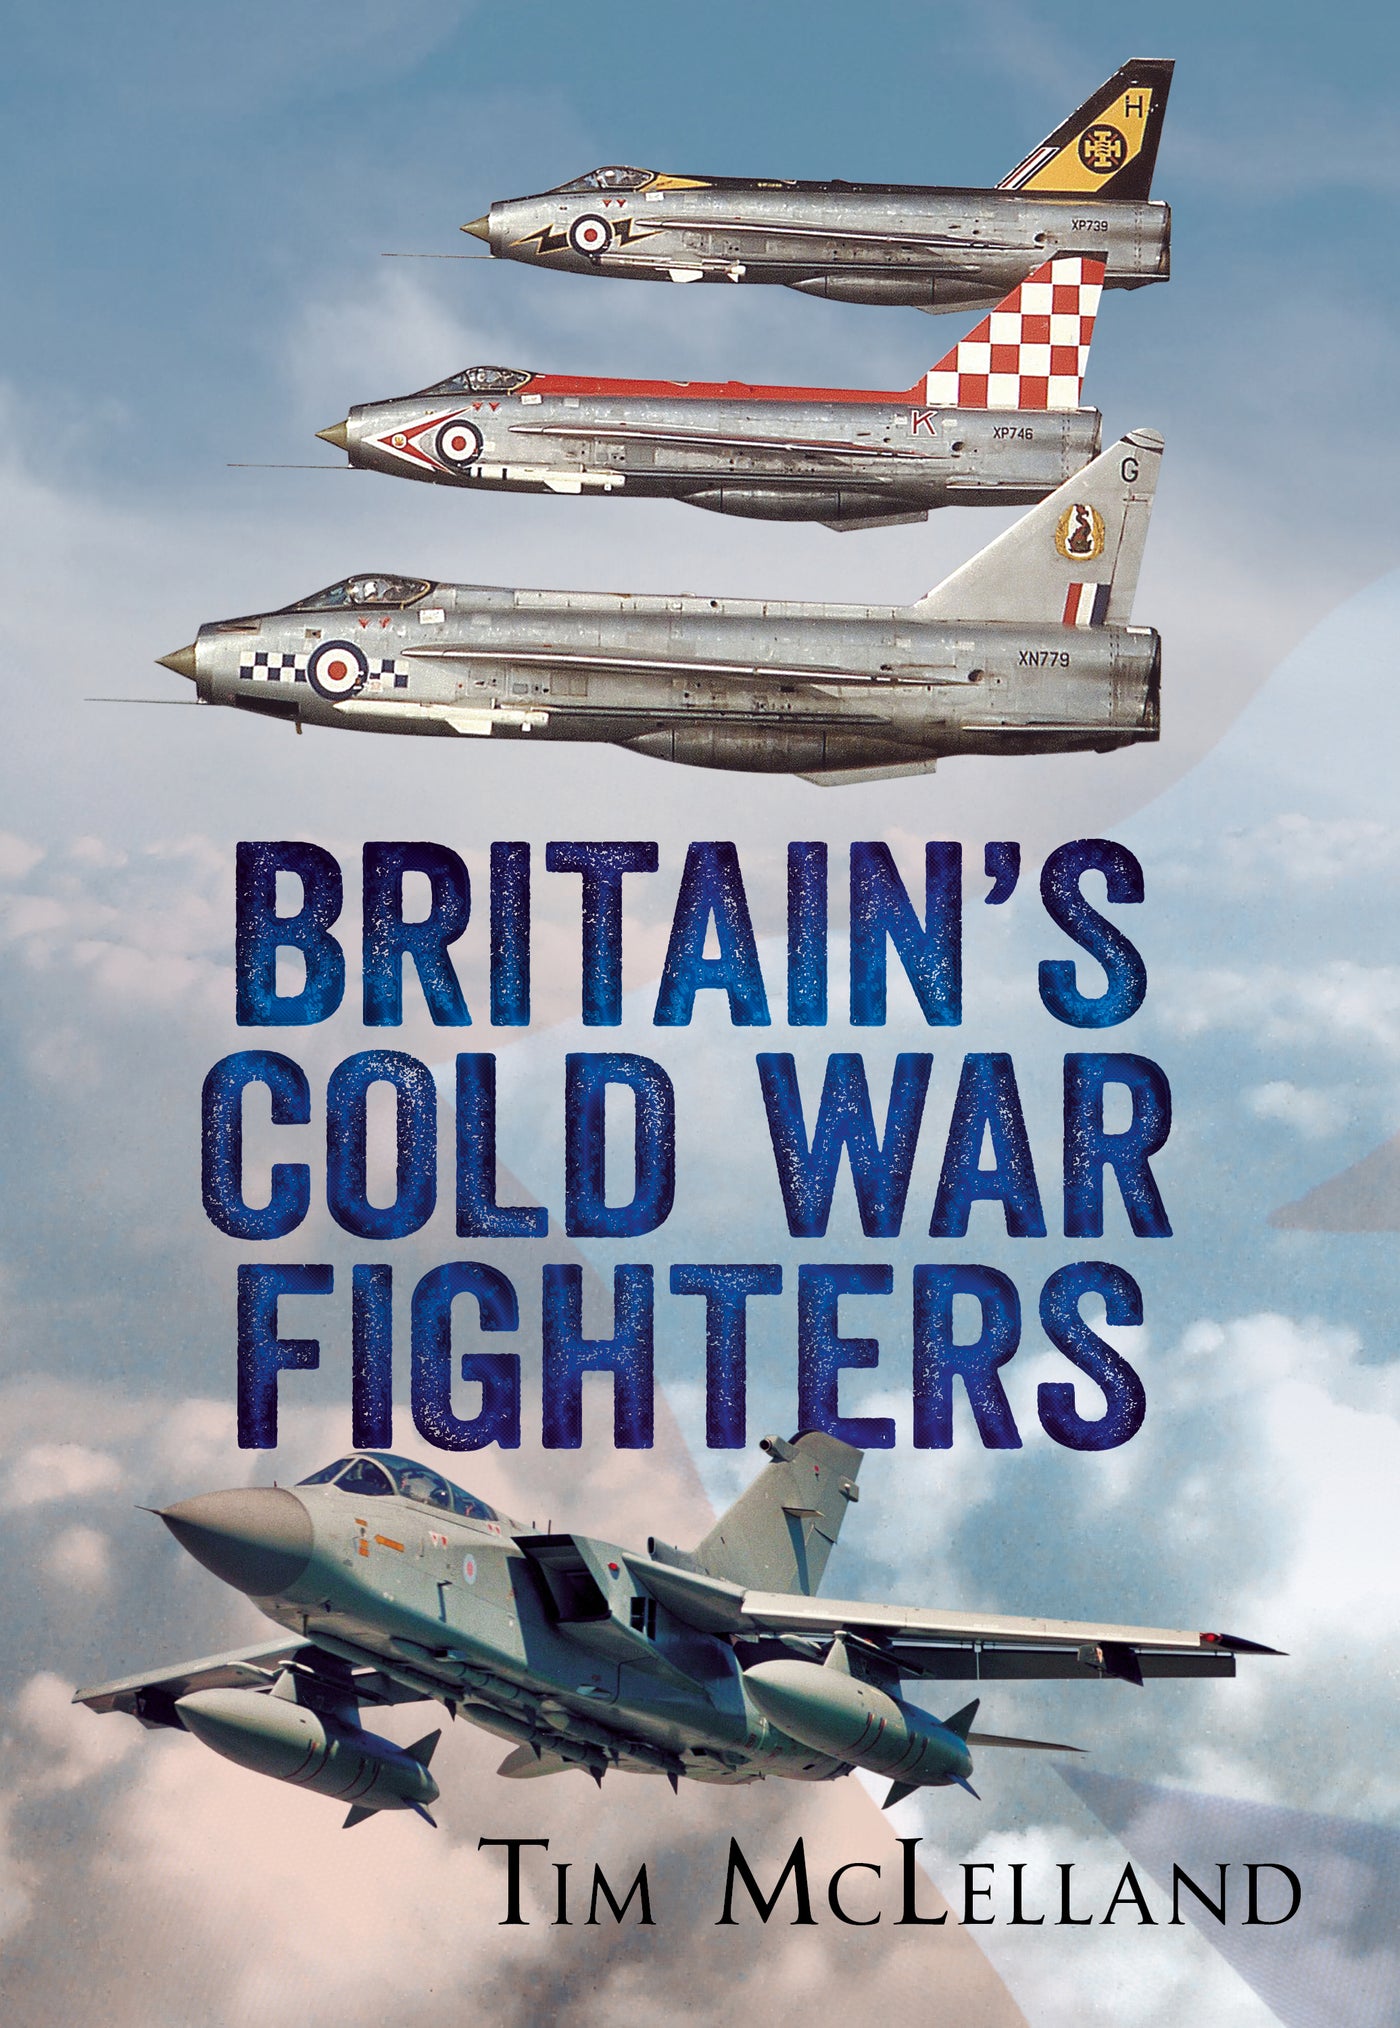 Britain's Cold War Fighters